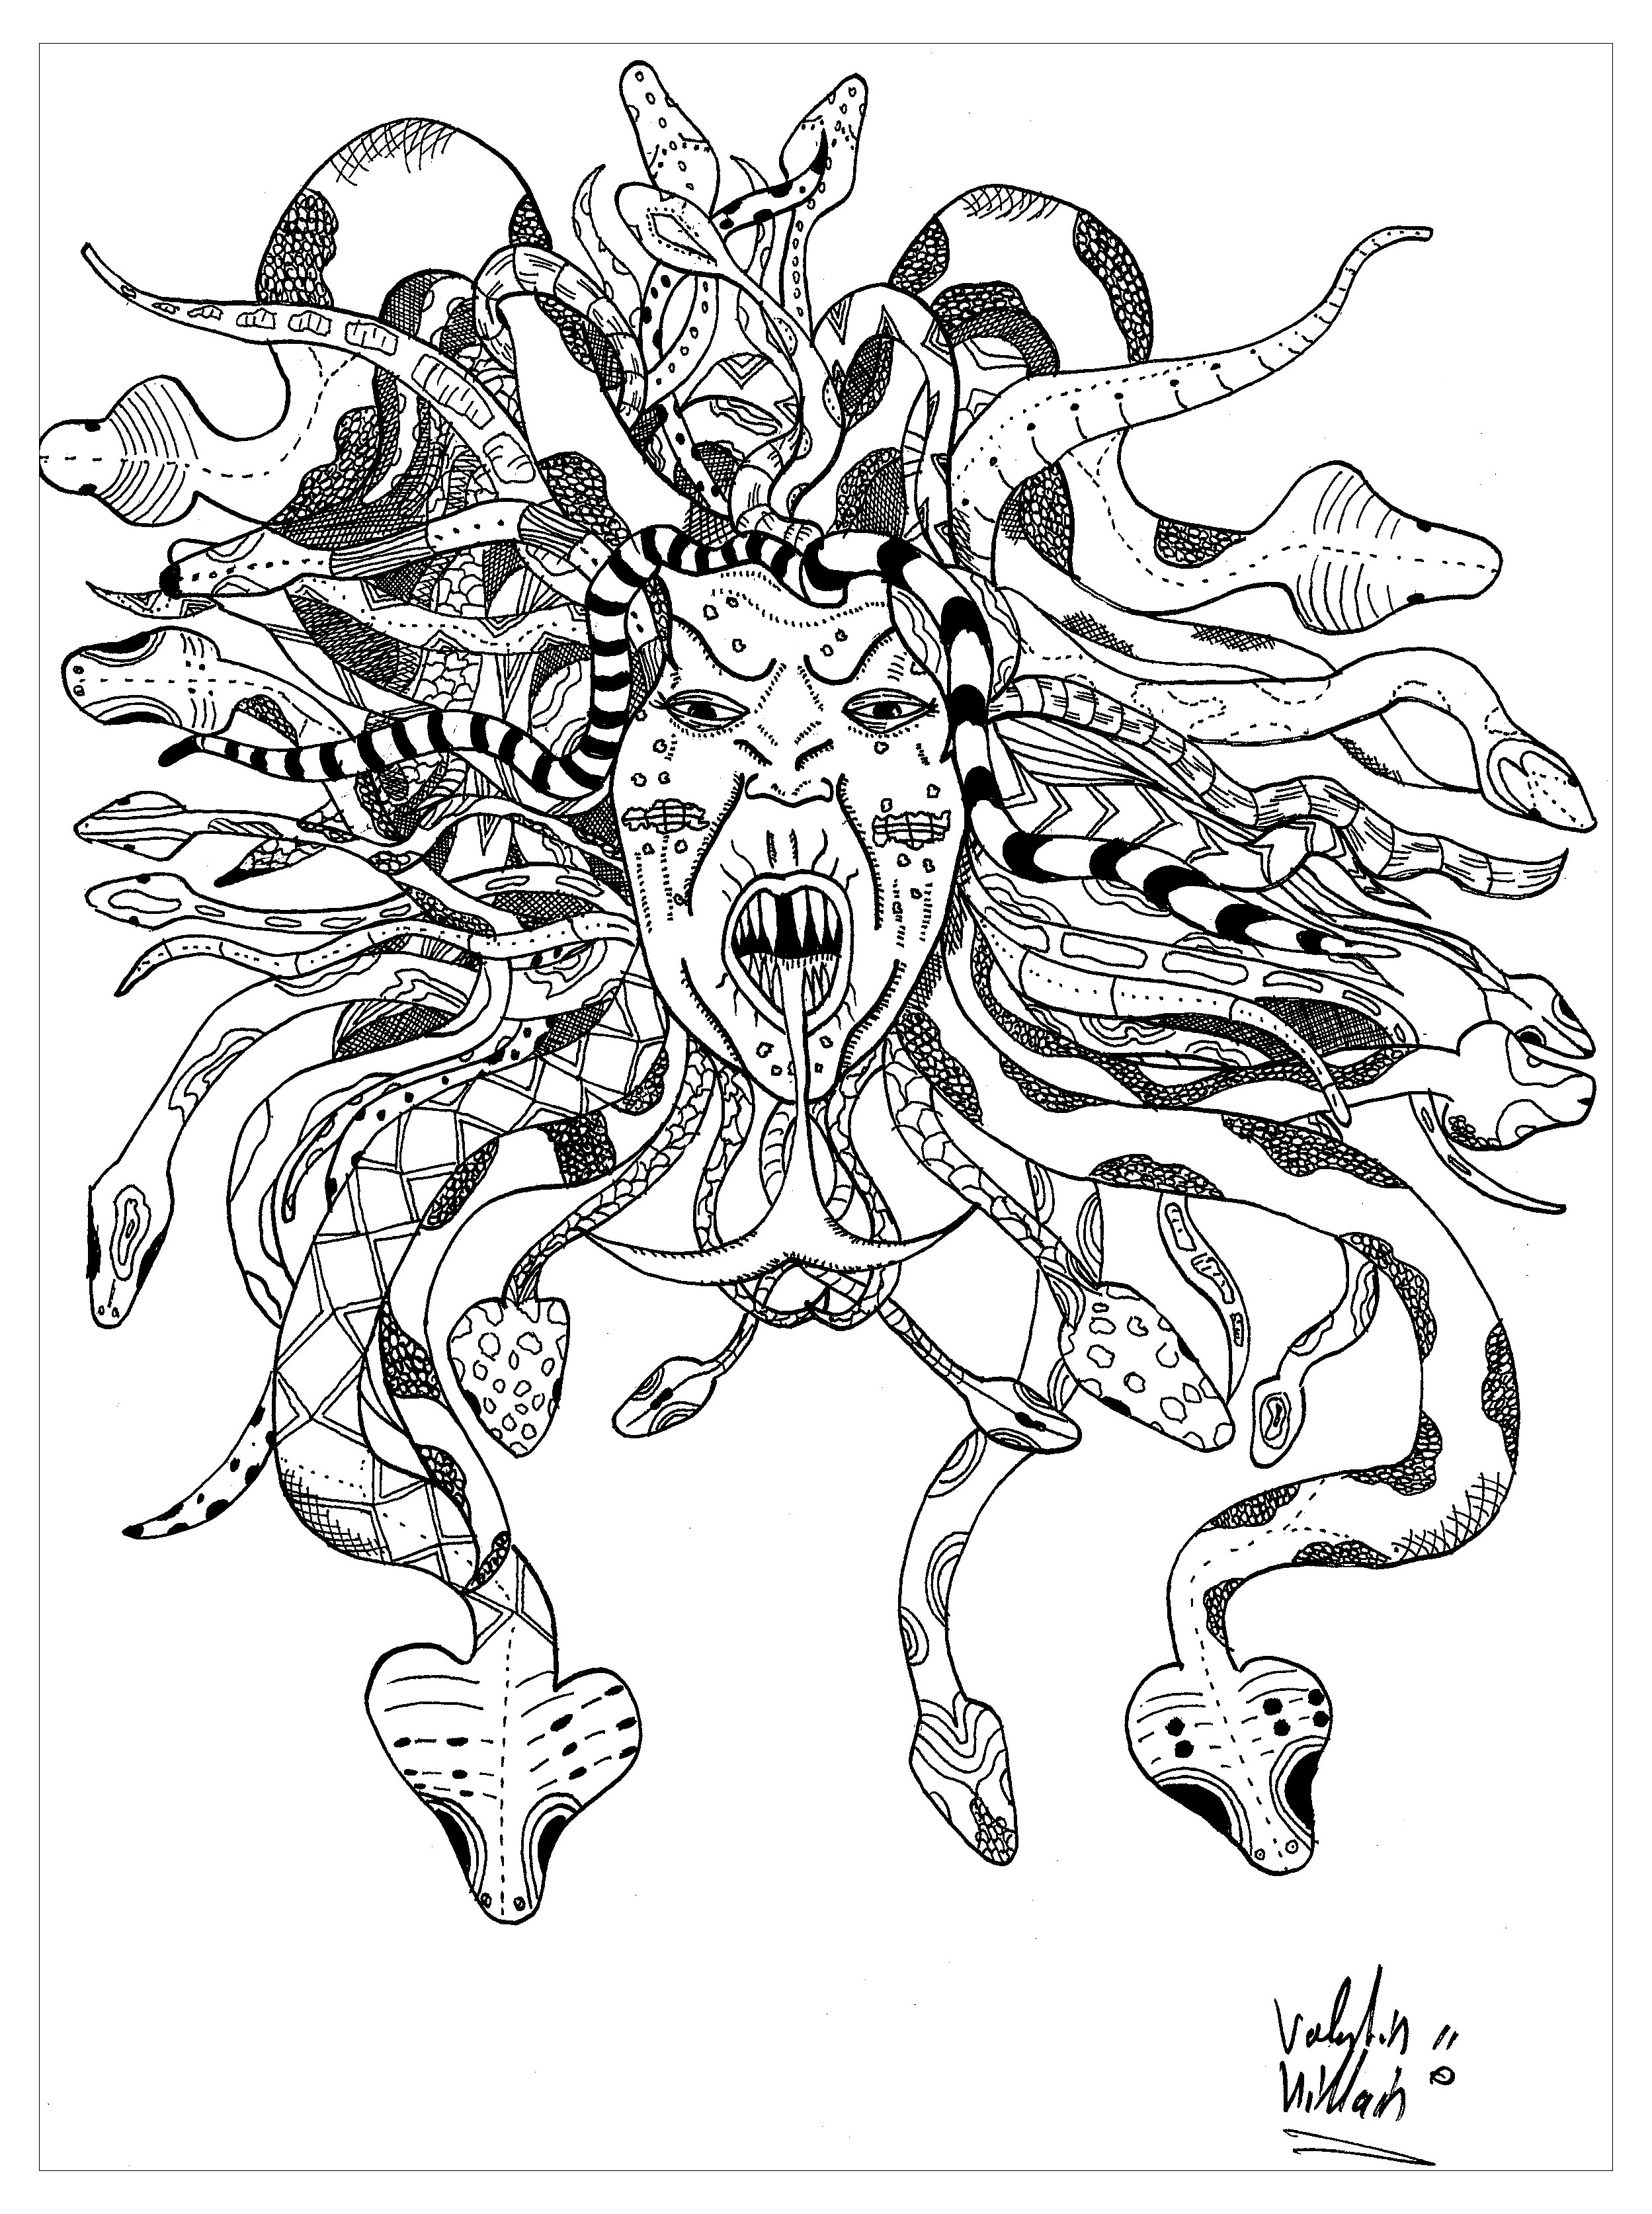 Coloring representing Medusa. Here is a magnificent representation of the mythical Gorgon Medusa. Her face is surrounded by a mane that is intertwined with snakes, which gives her a terrifying look.